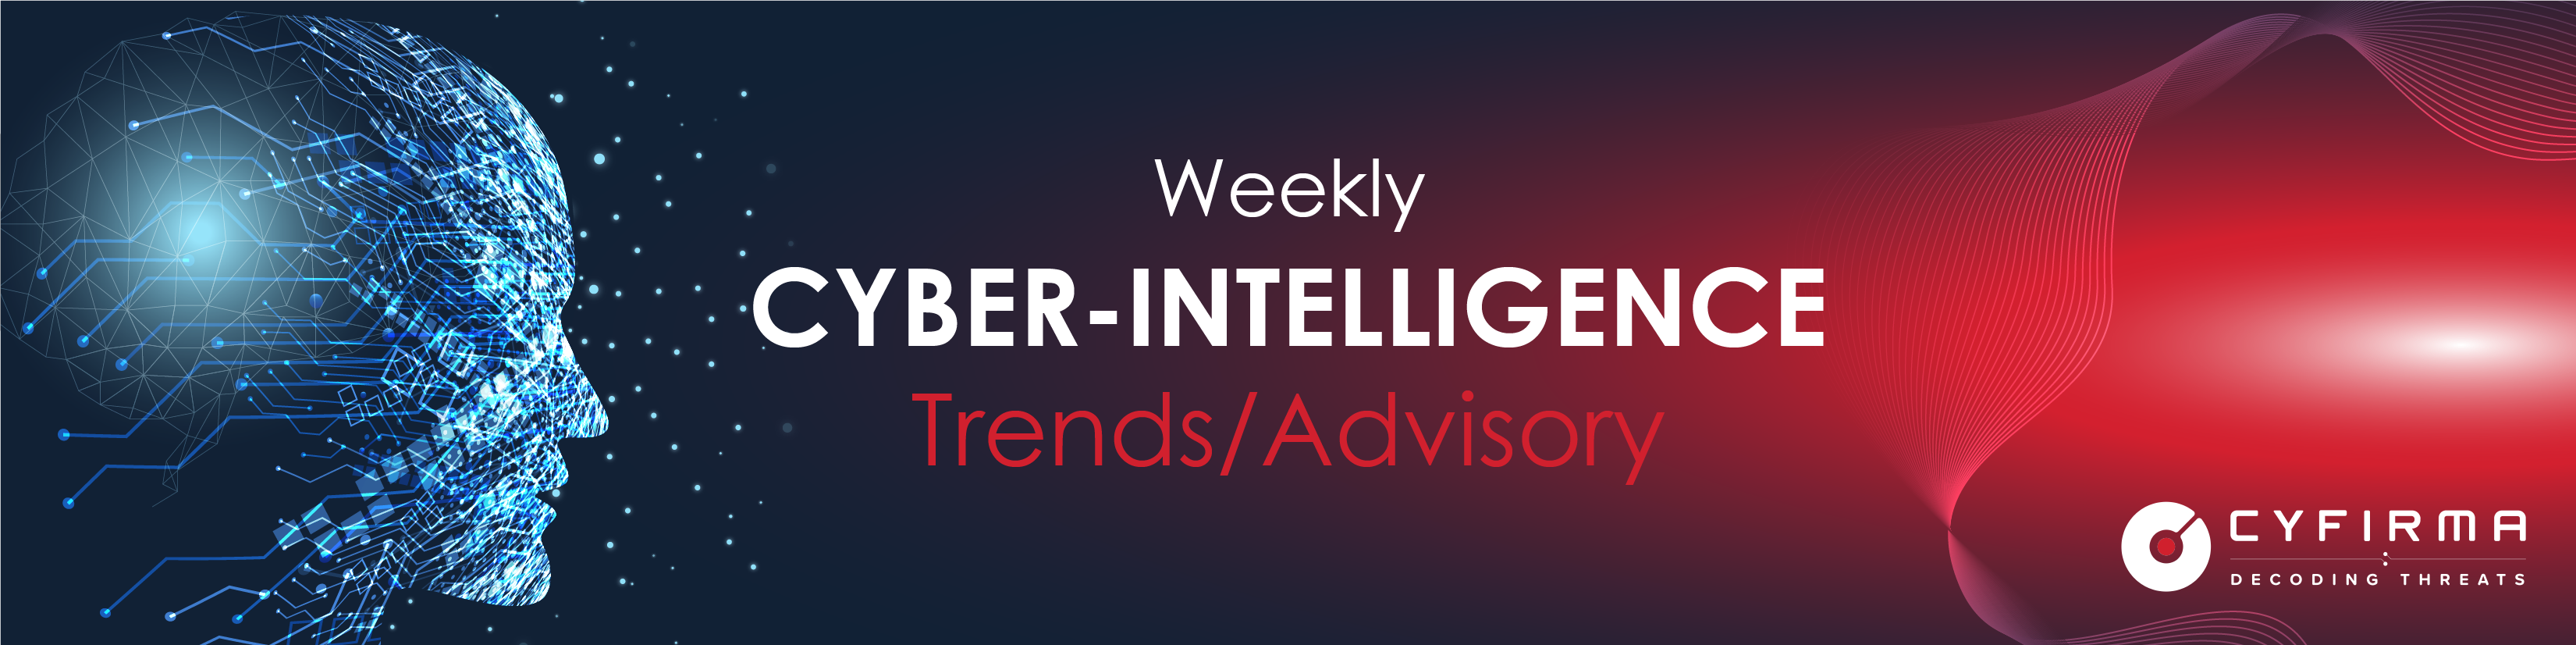 Weekly Intelligence Trends and Advisory | Threat Actor in Focus | Rise in Malware, Ransomware, Phishing | Vulnerability and Exploits – 19 Dec 2021